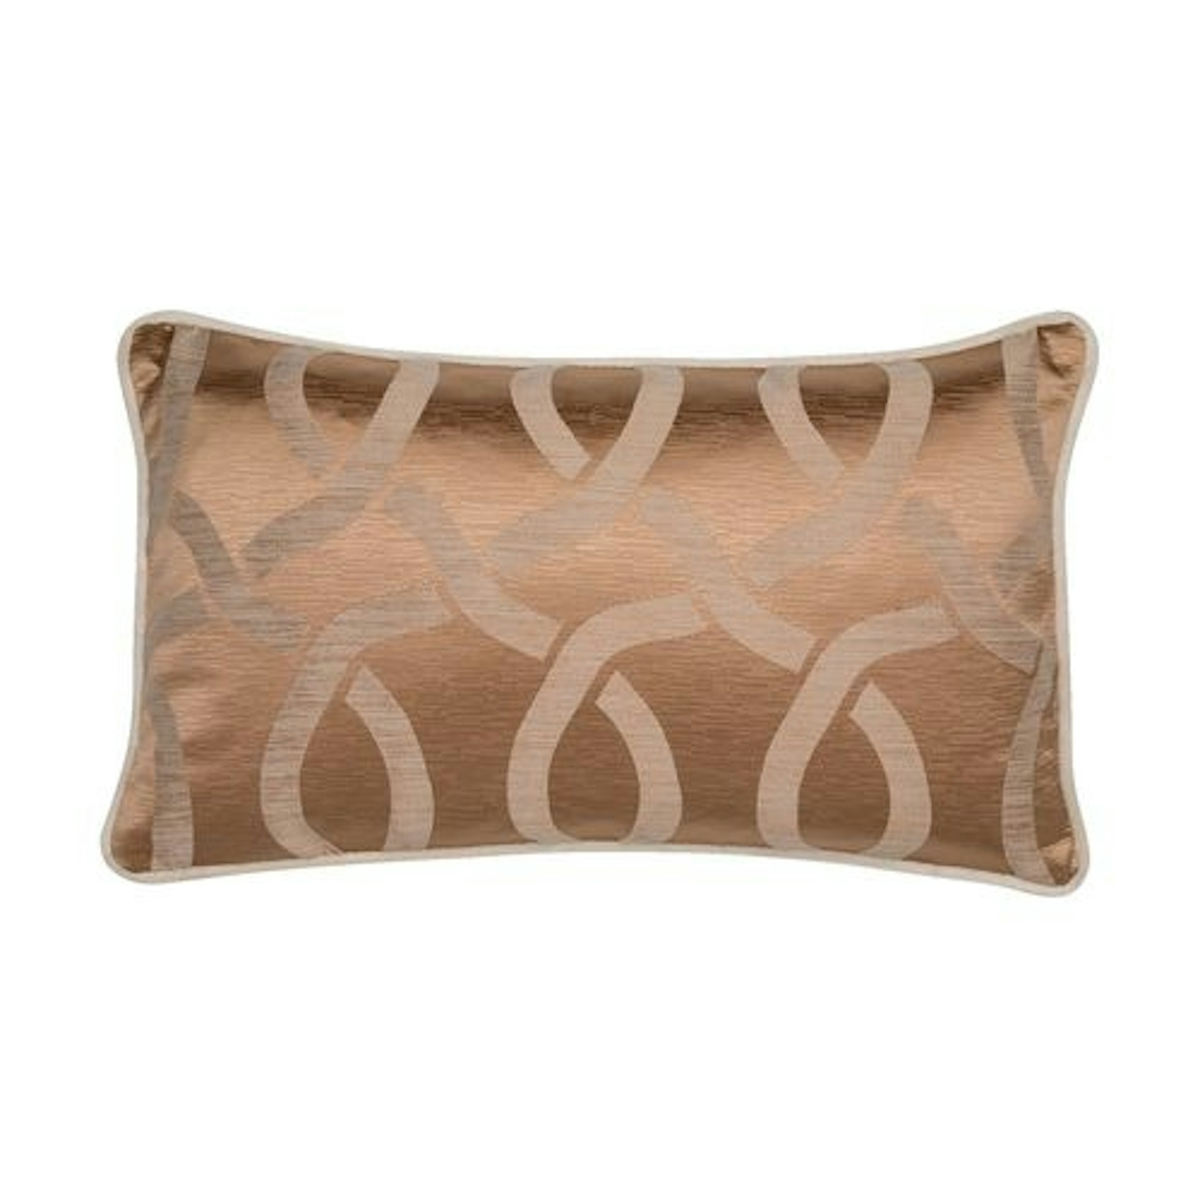 Sunstone Torri Cushion - 9 Best Luxury Cushions to Buy for your Home - Style Guide - LuxDeco.com